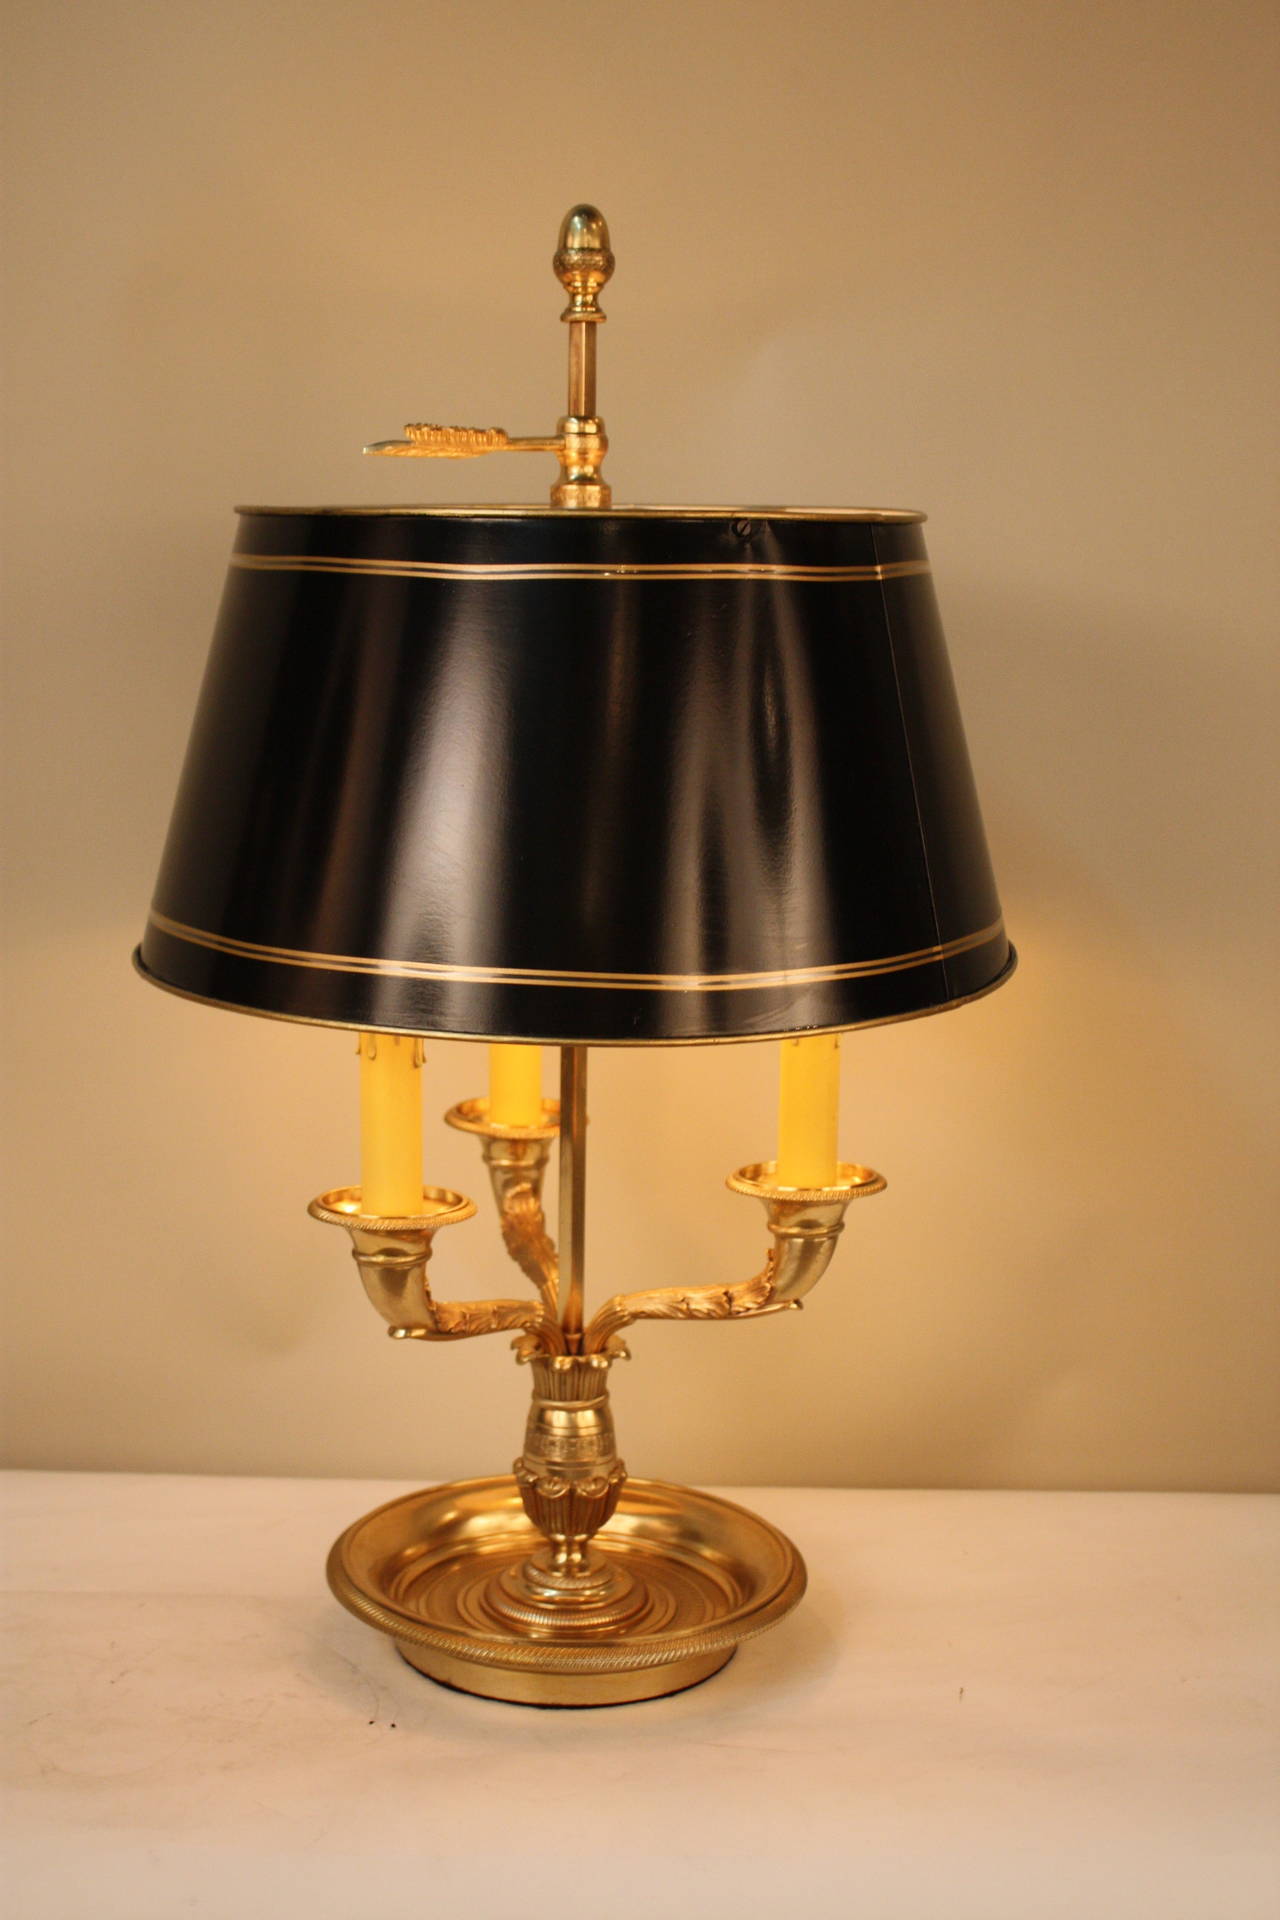 A beautiful bronze French Empire bouillotte lamp, with adjustable shade.
This lamp has three lights max 60 watt each.